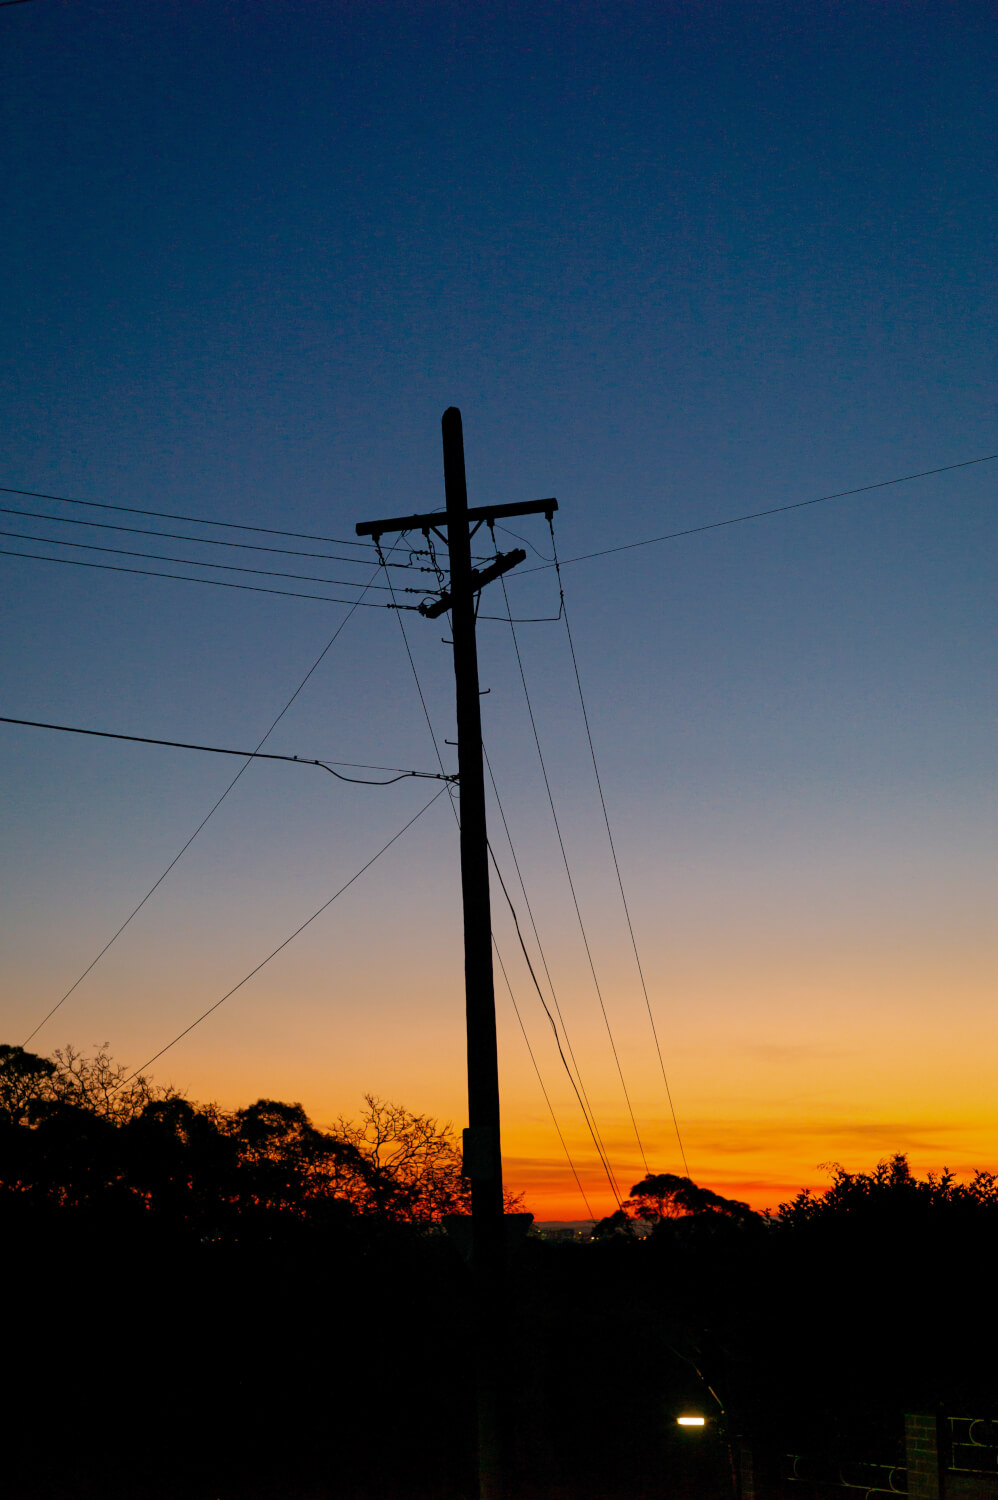 My favourite sunset pole, on a hill overlooking the Sydney basin. shot on Leica M9, those sunset colours really amaze me.  I must have driven past this pole thousands of times, yet this scene is just pure magic.